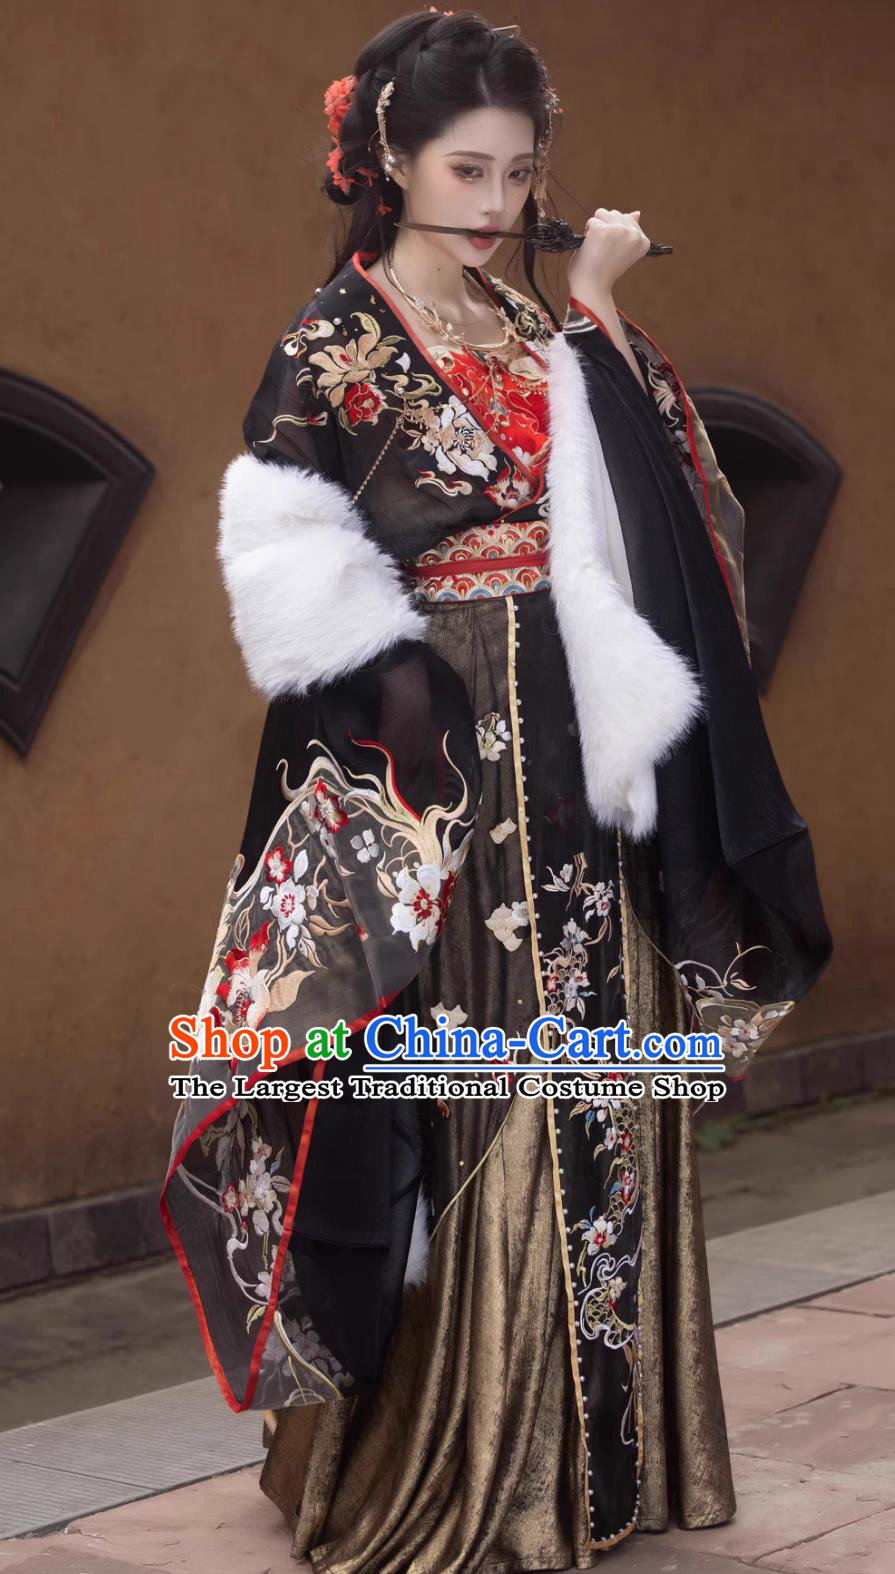 Chinese Ancient Court Woman Garment Costumes Wei Jin Northern and Southern Dynasties Princess Black Embroidered Dress Hanfu Online Shop